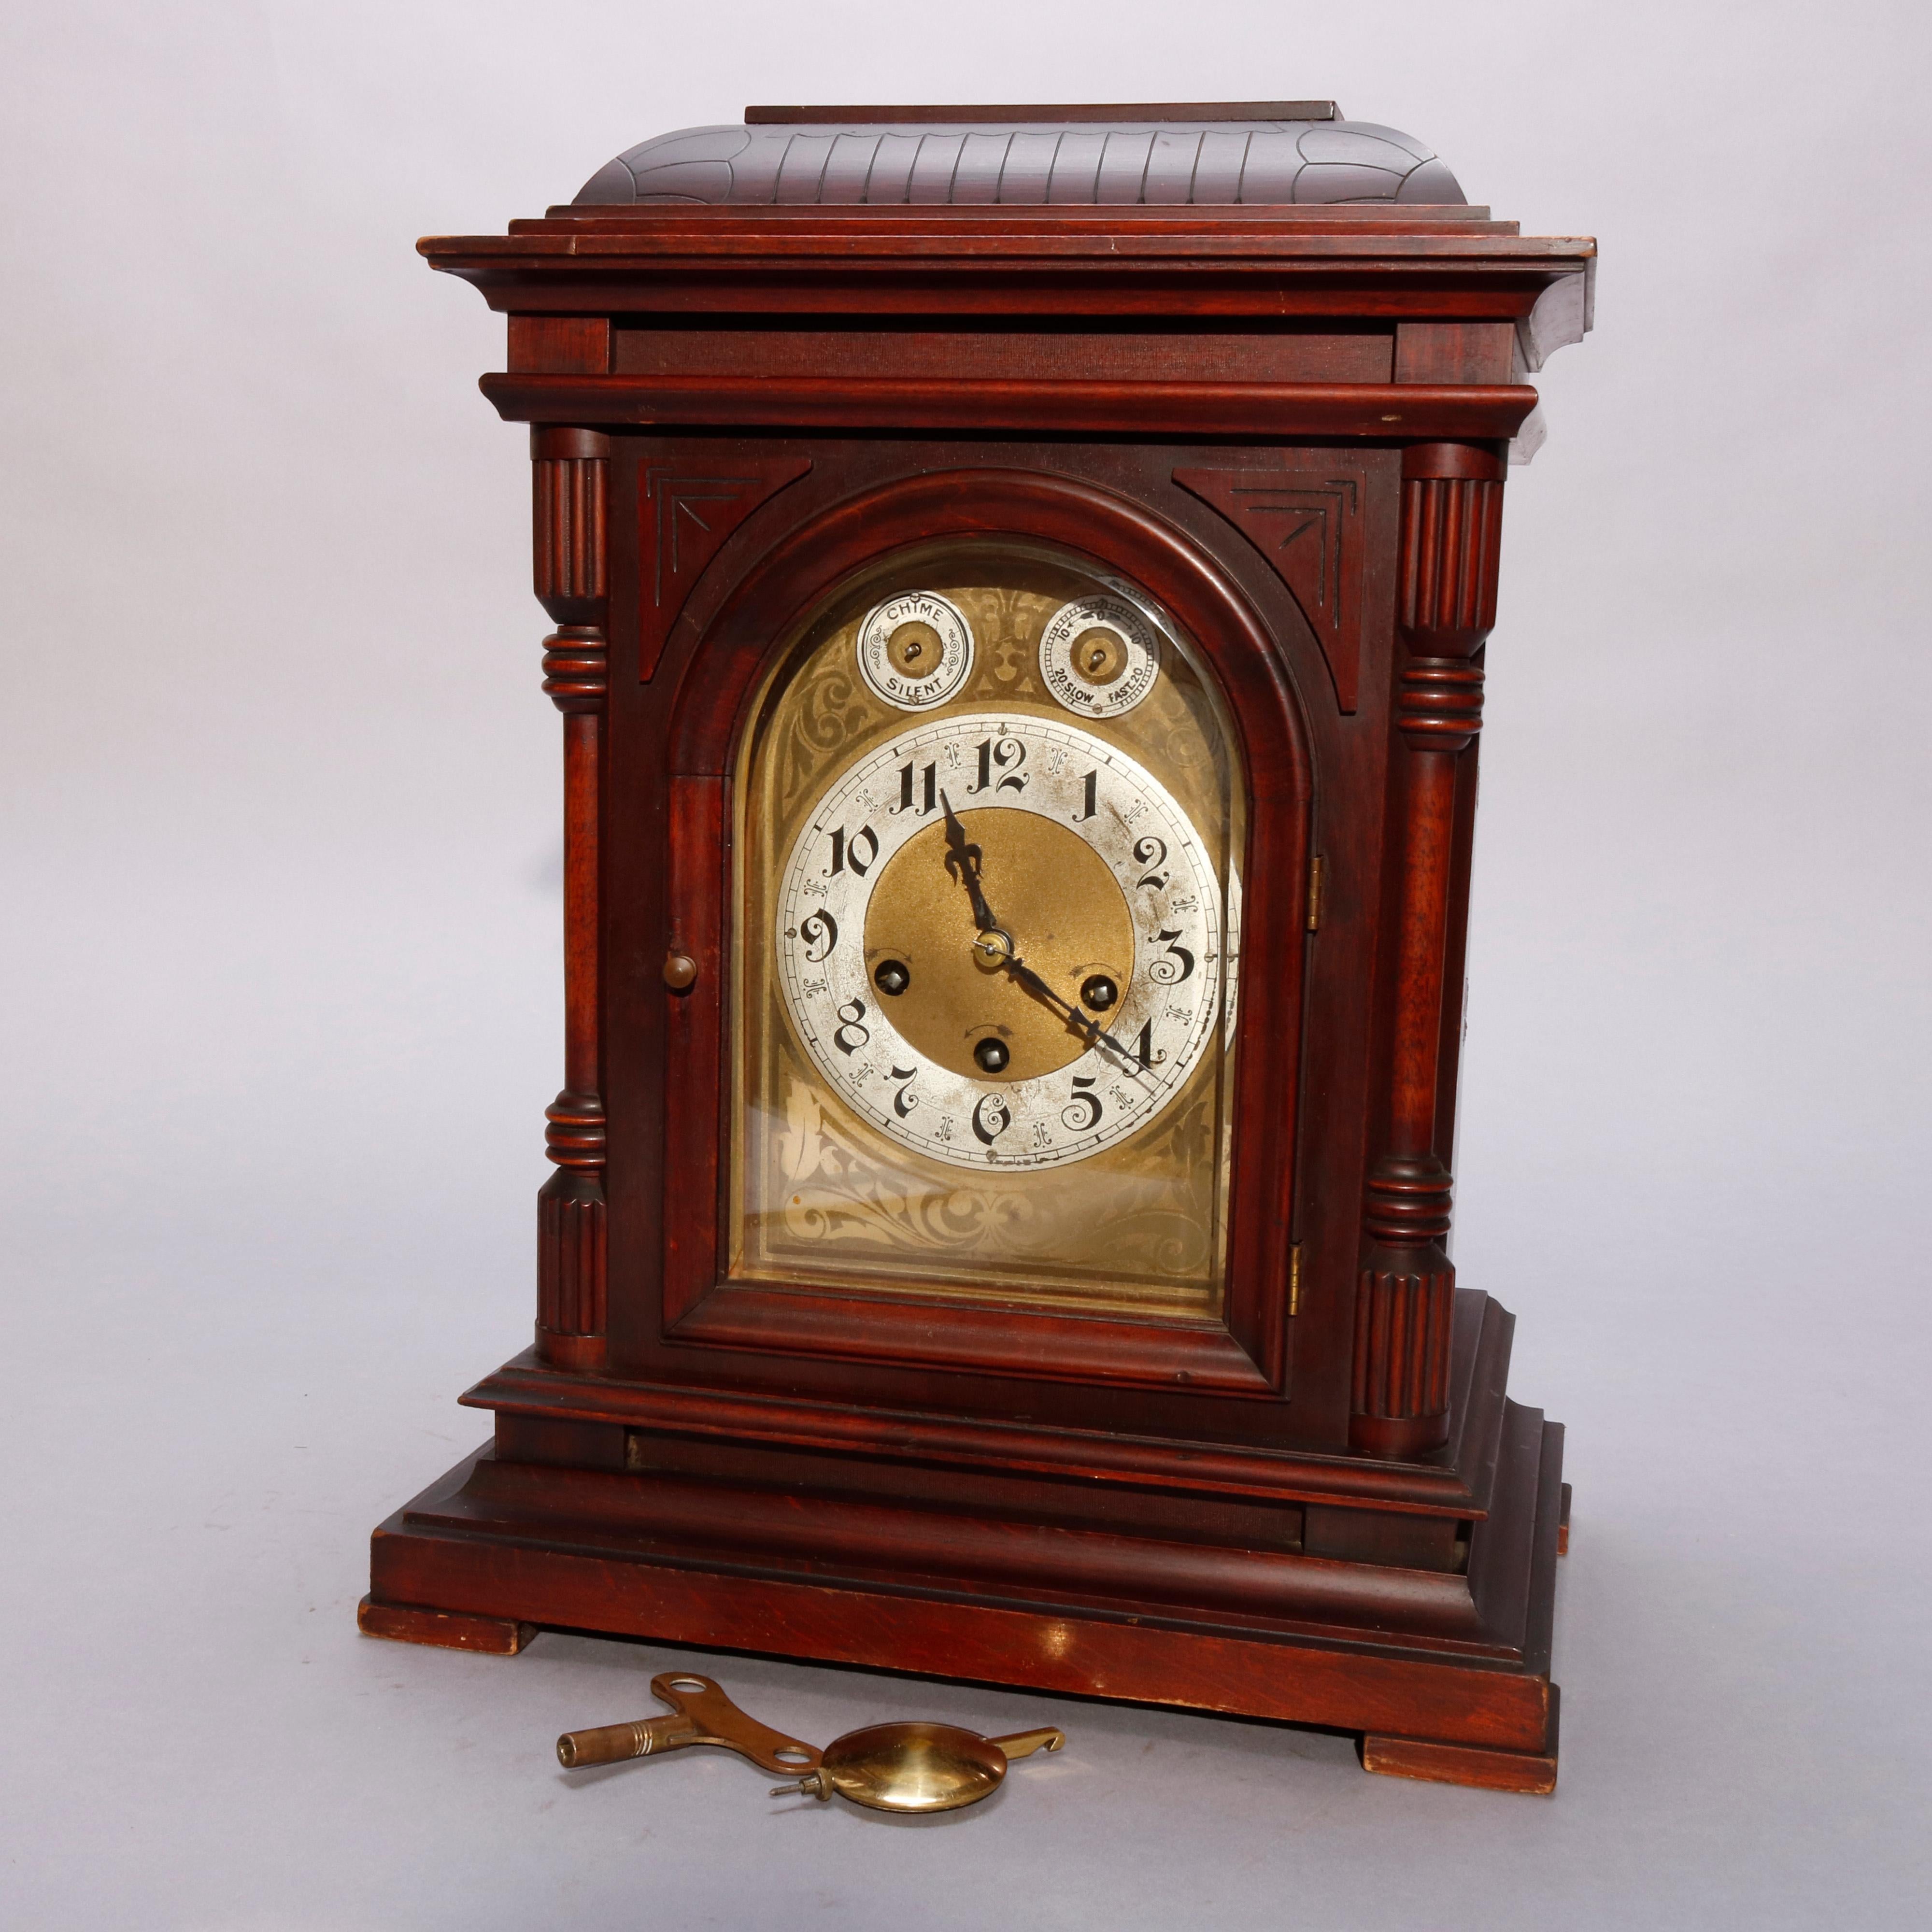 An antique German Junghan bracket clock offers mahogany case with incised domed top surmounting paneled case having arched face with flanking balustrade supports, raised on stepped base, with key, circa 1910.

Measures: 17.75